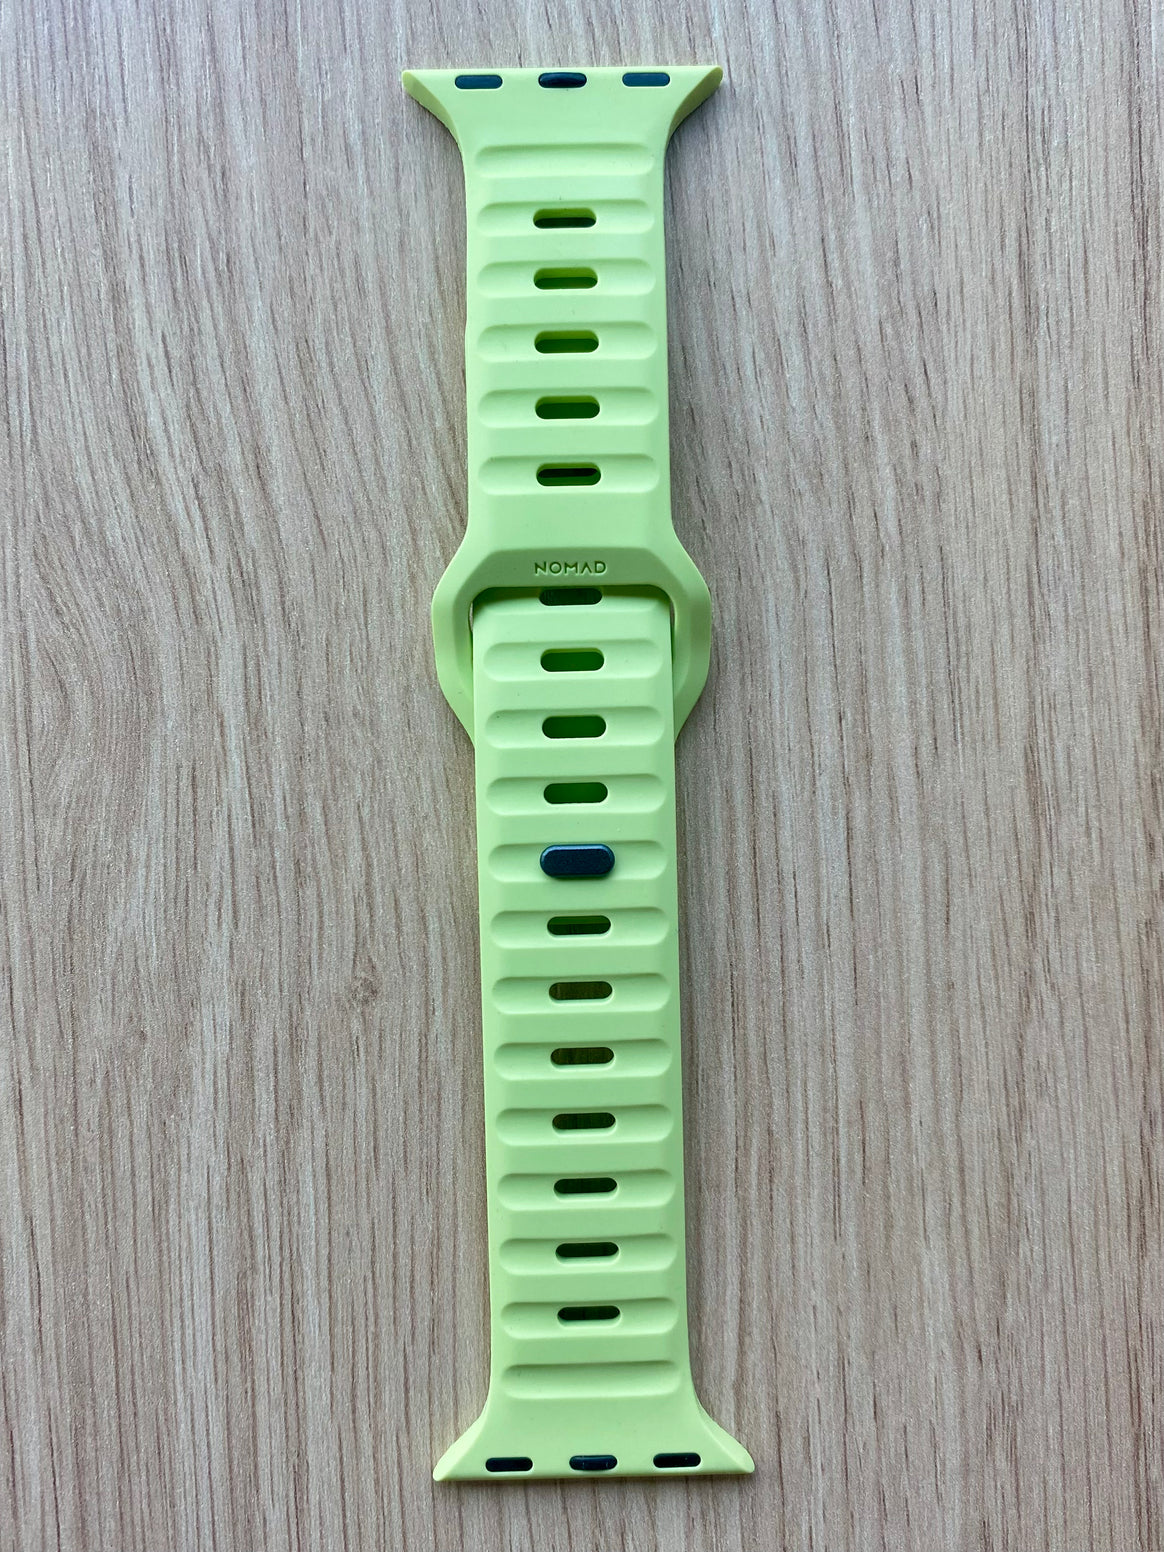 Nomad Sport Band - 45/49mm - Glow 2.0 - Limited Edition - Open Box